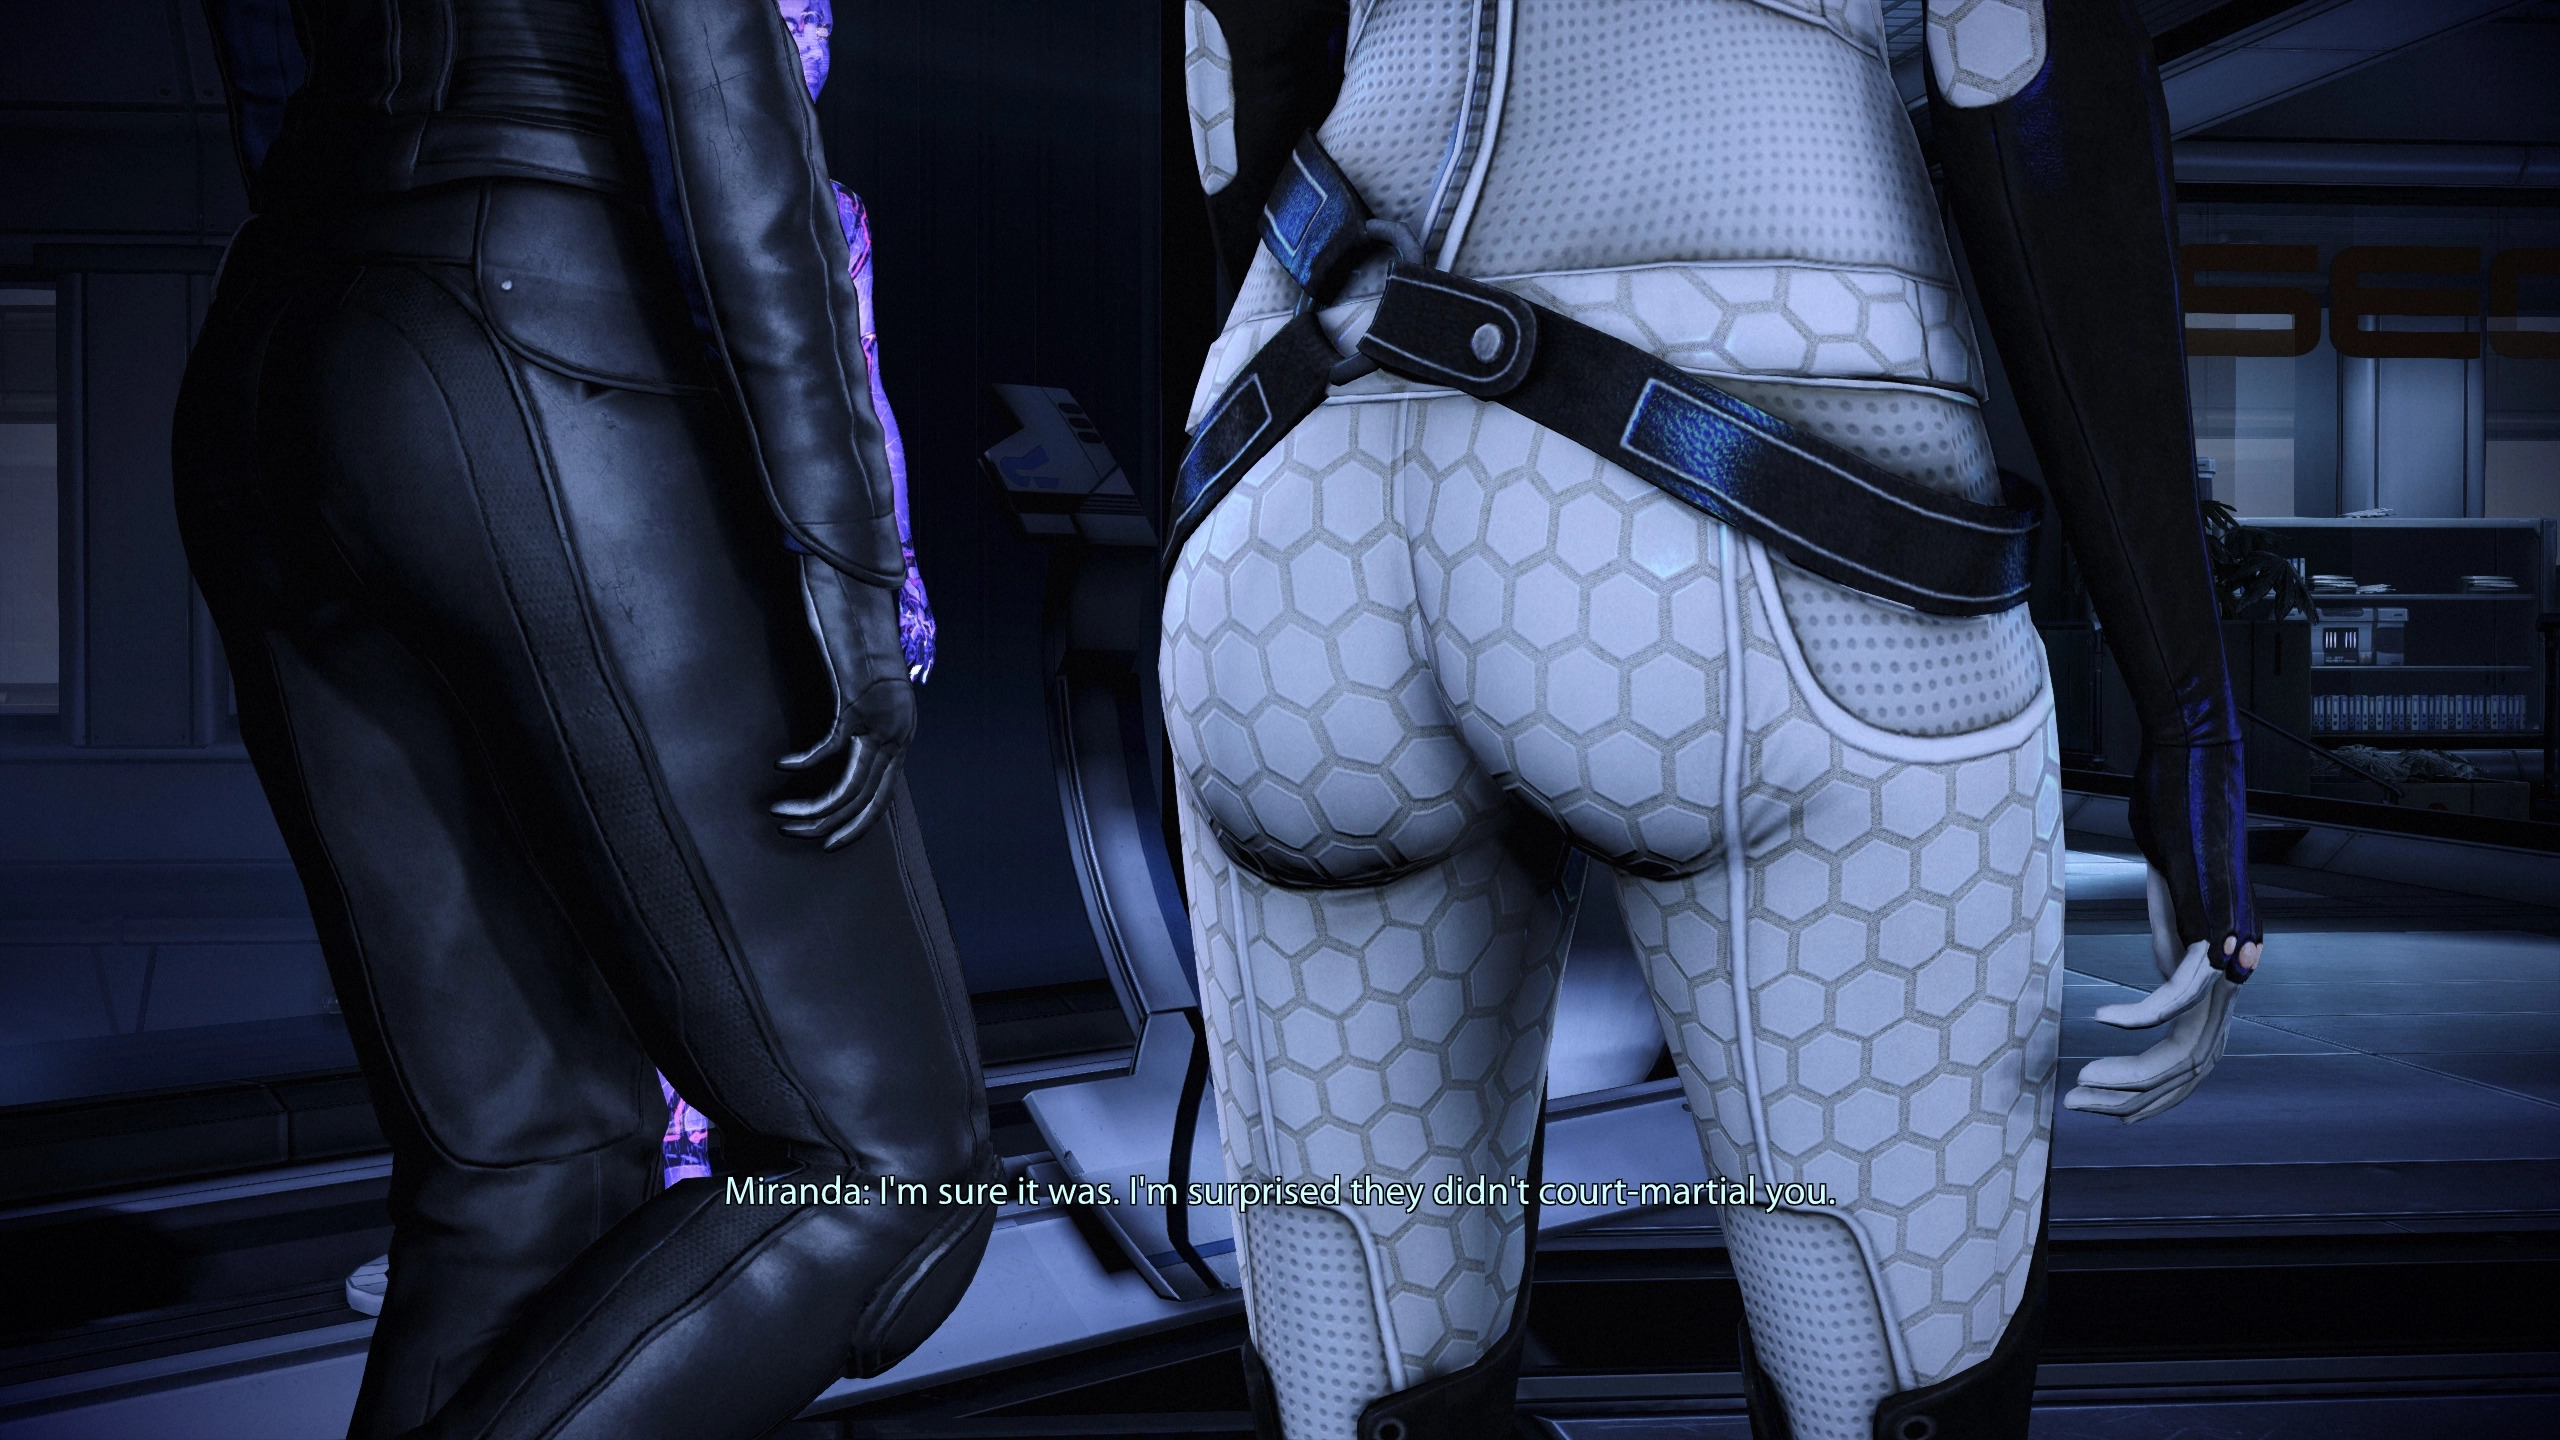 carmela verdote recommends mass effect adult mods pic